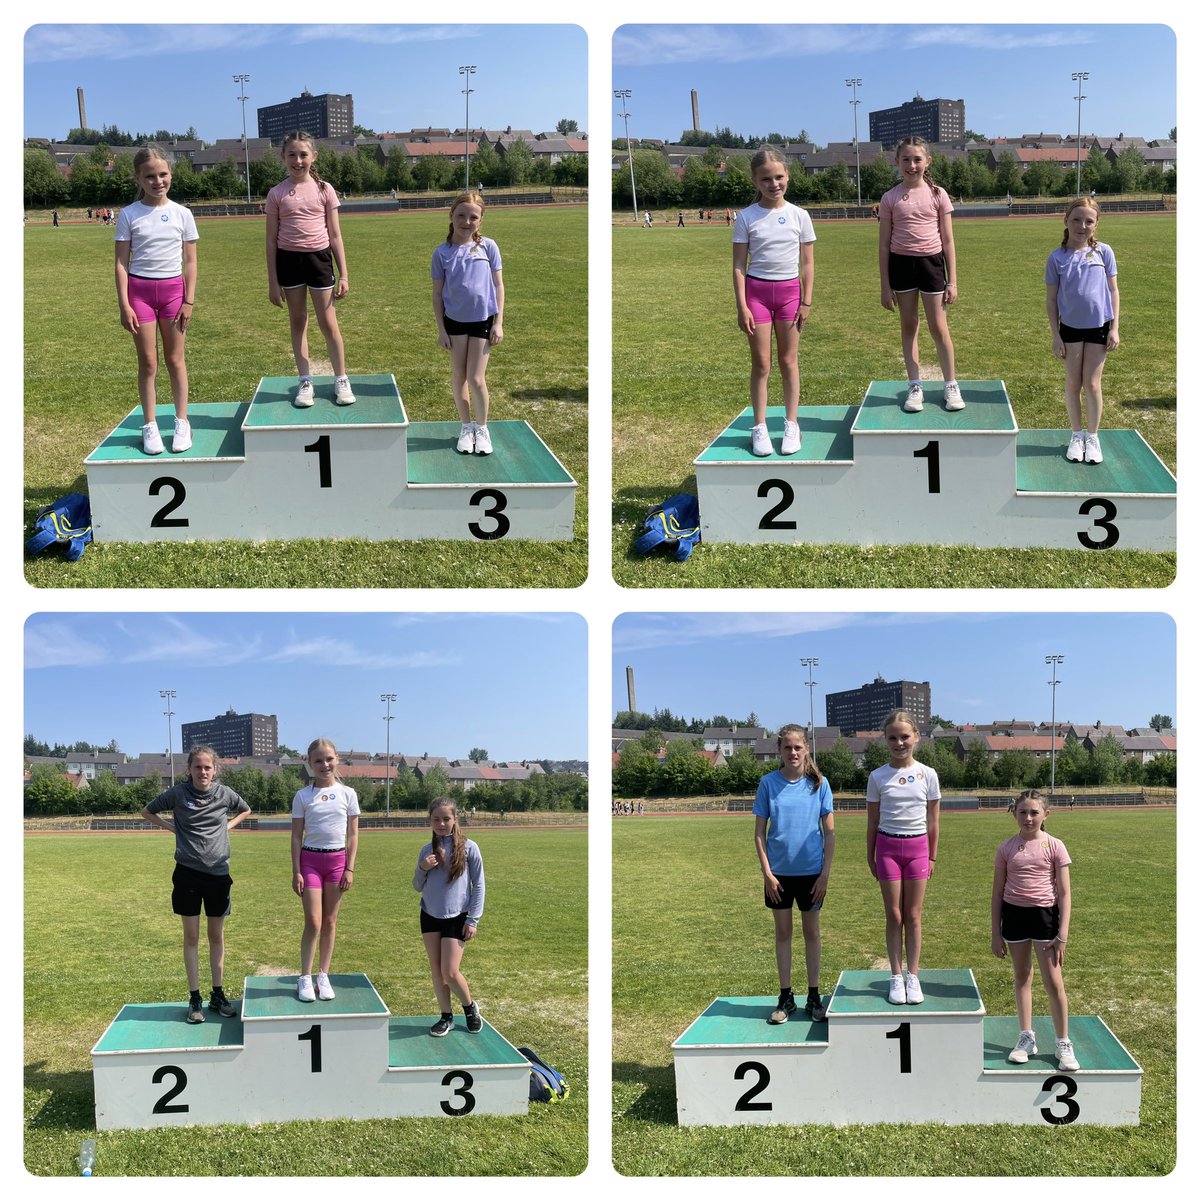 P7 girls also had a fantastic and successful time at our sports day! Here are our winners of the bean bag race, the flat race and the hurdles👏🏃‍♀️🥇🥈🥉@BonarMrs